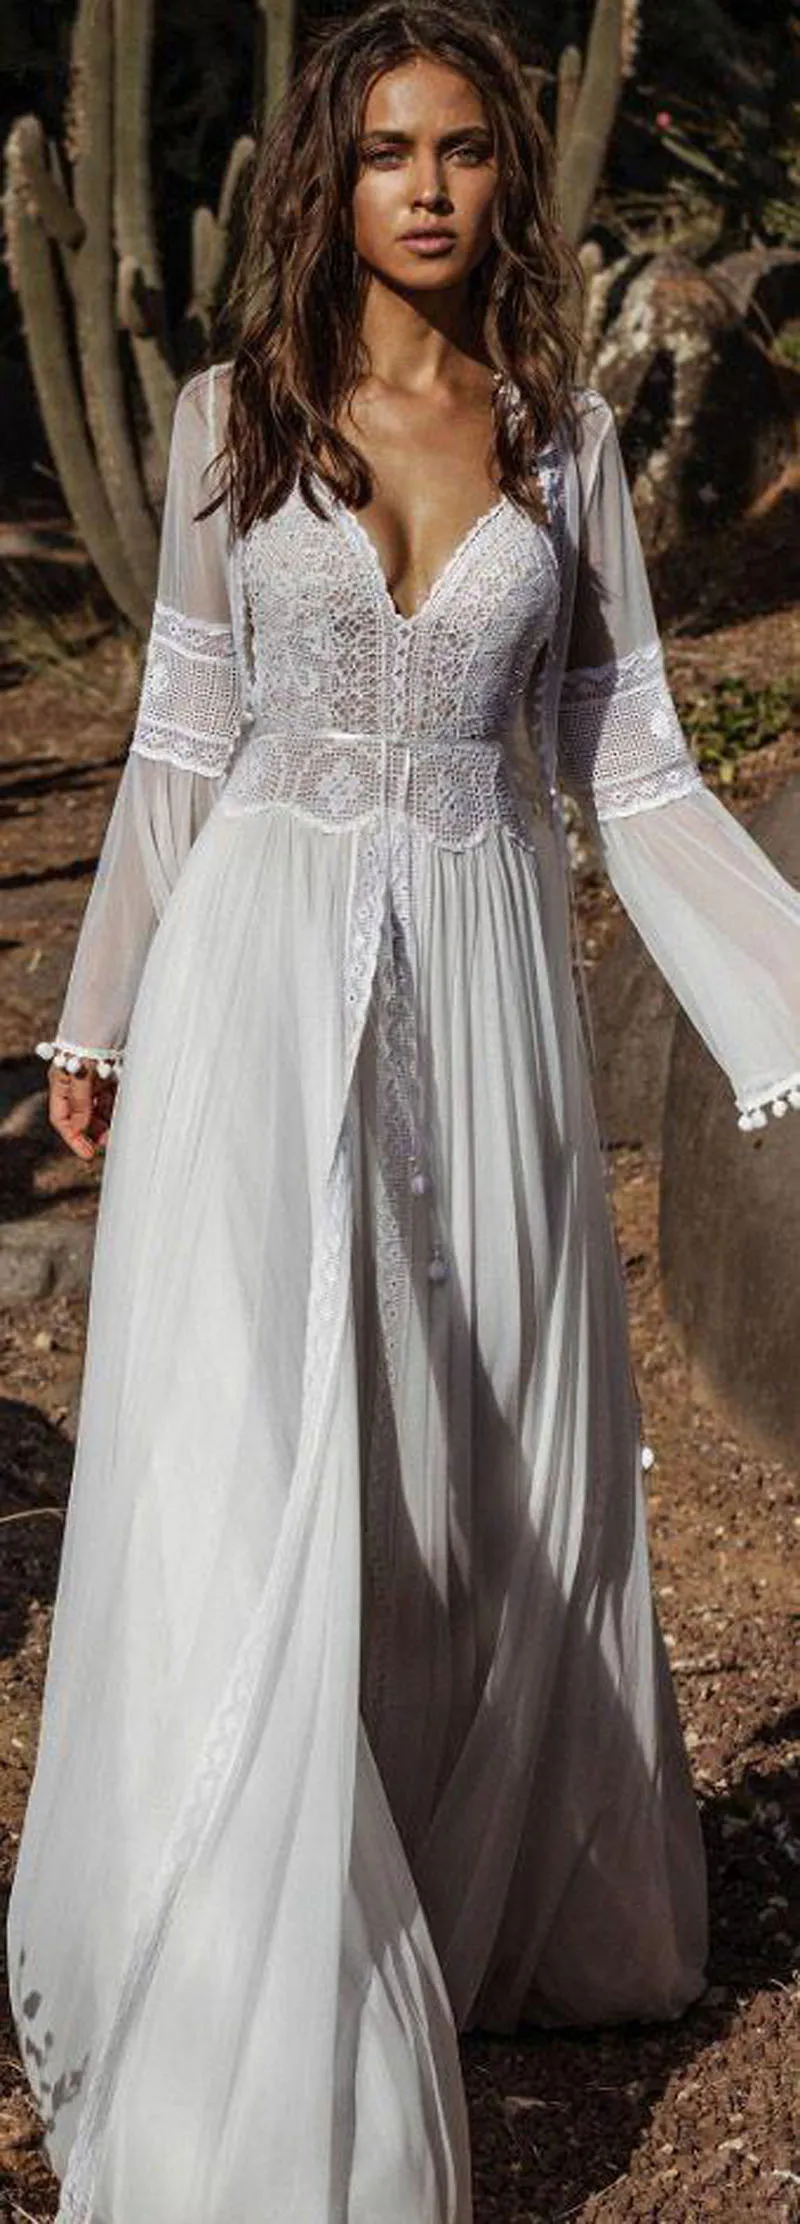 Vintage Crochet Lace Boho Beach Wedding Dress With Long Sleeves And Wrap  Jacket Fairy Flowy Chiffon Beach Boho Bridal Gown By AASAF Dadush Style  326B From Adrs7, $178.32